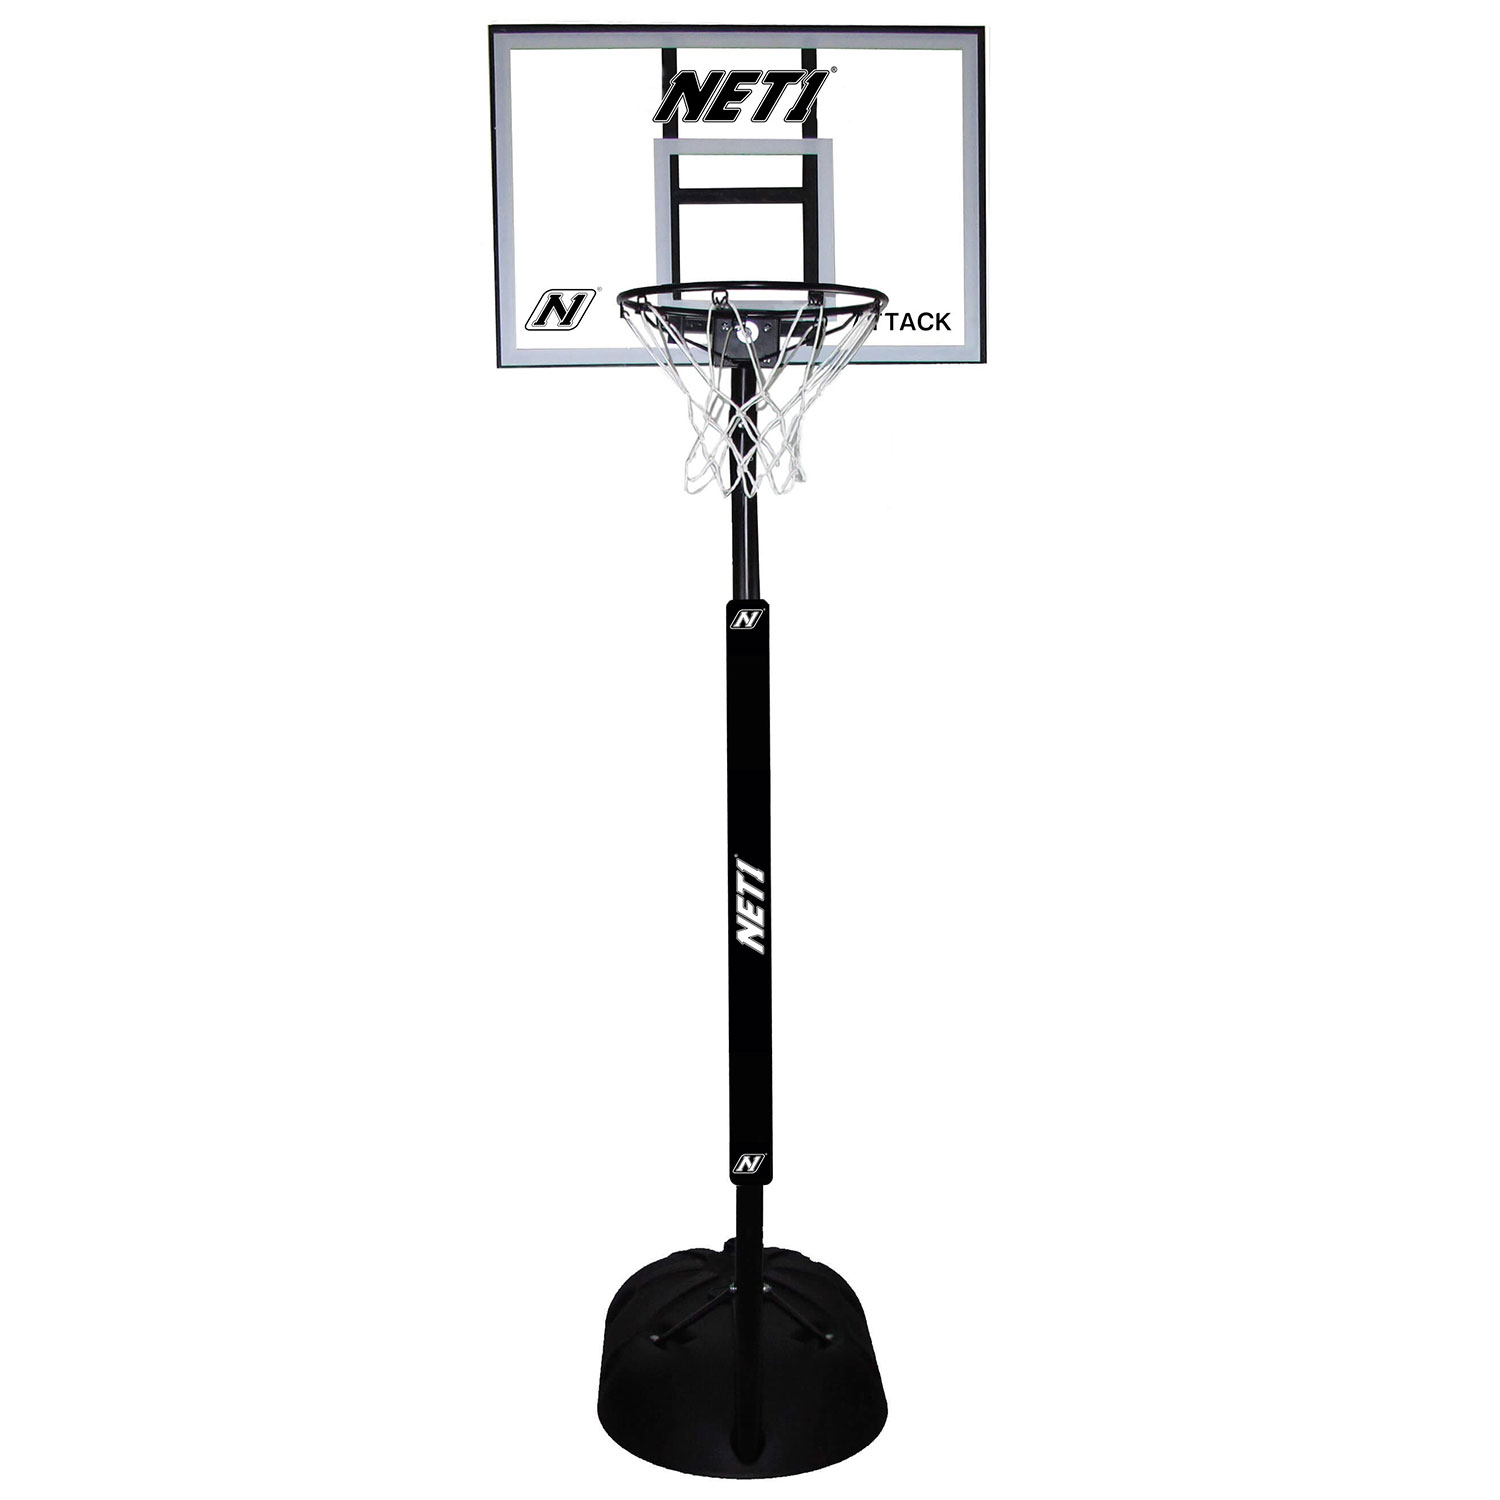 NET1 ATTACK YOUTH PORTABLE BASKETBALL SYSTEM